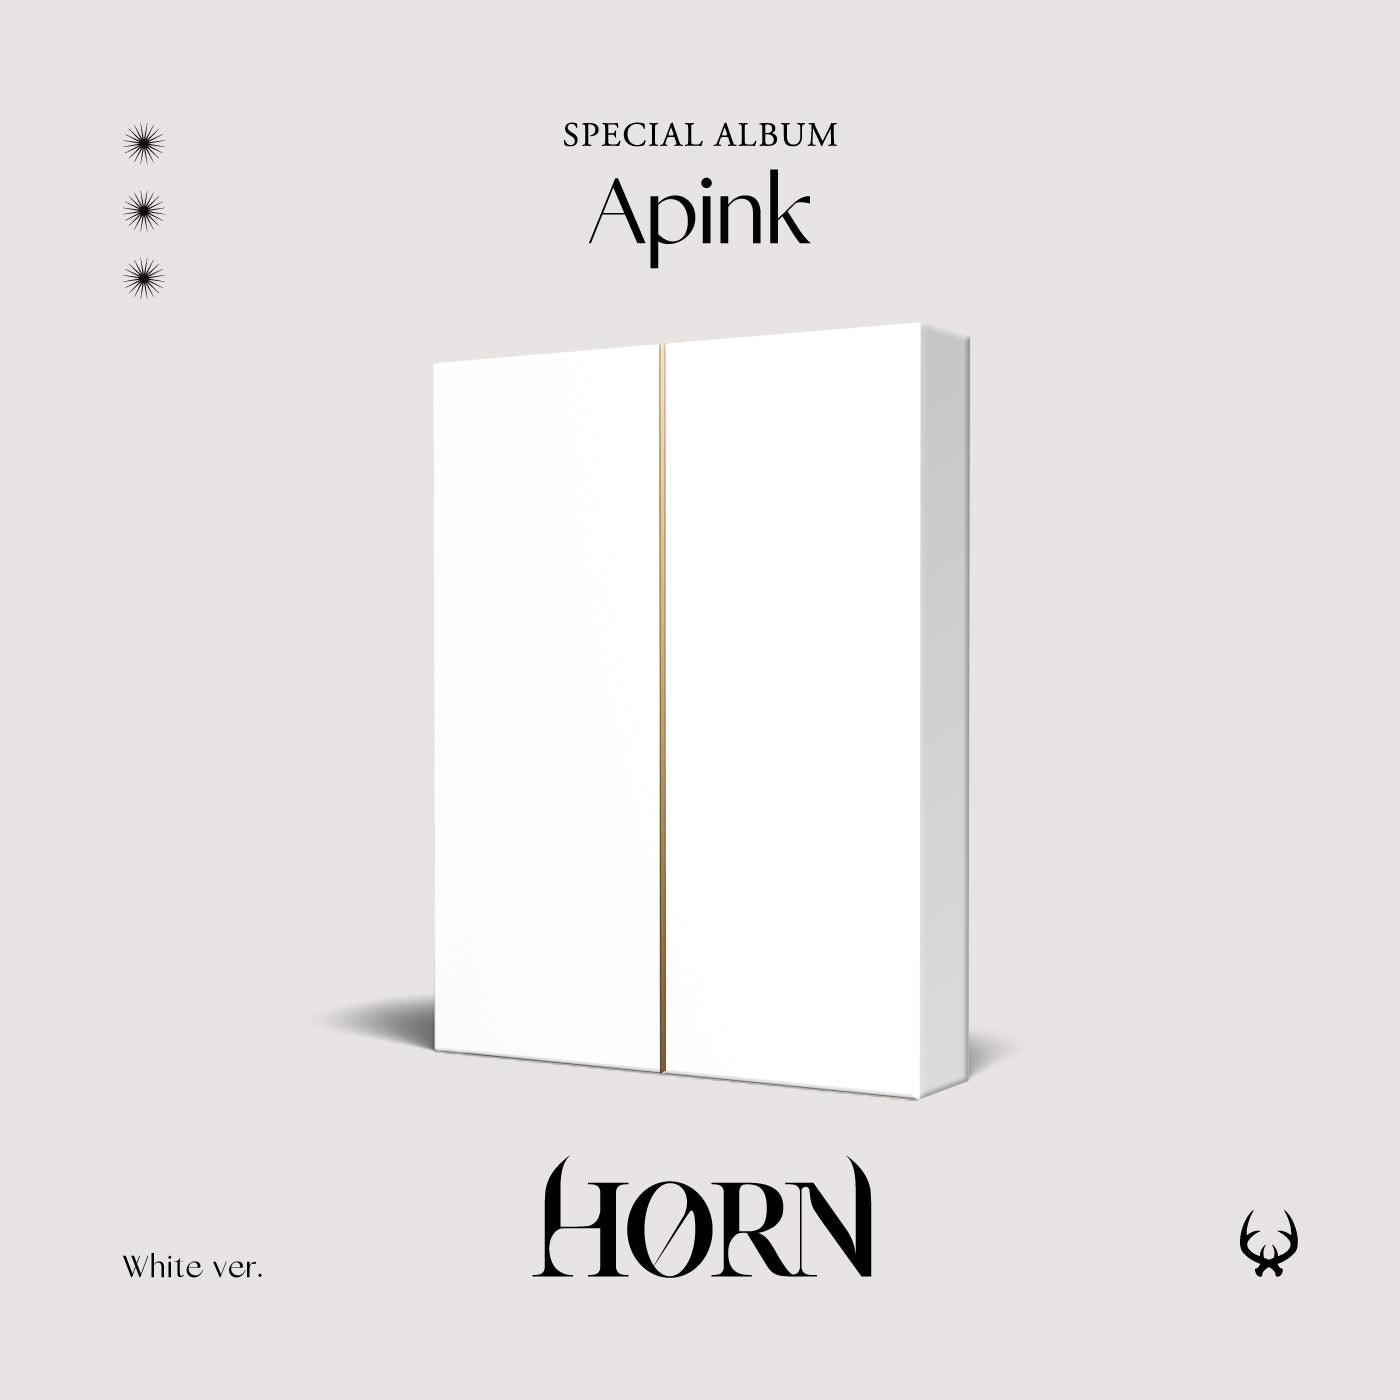 APINK SPECIAL ALBUM 'HORN' white version cover